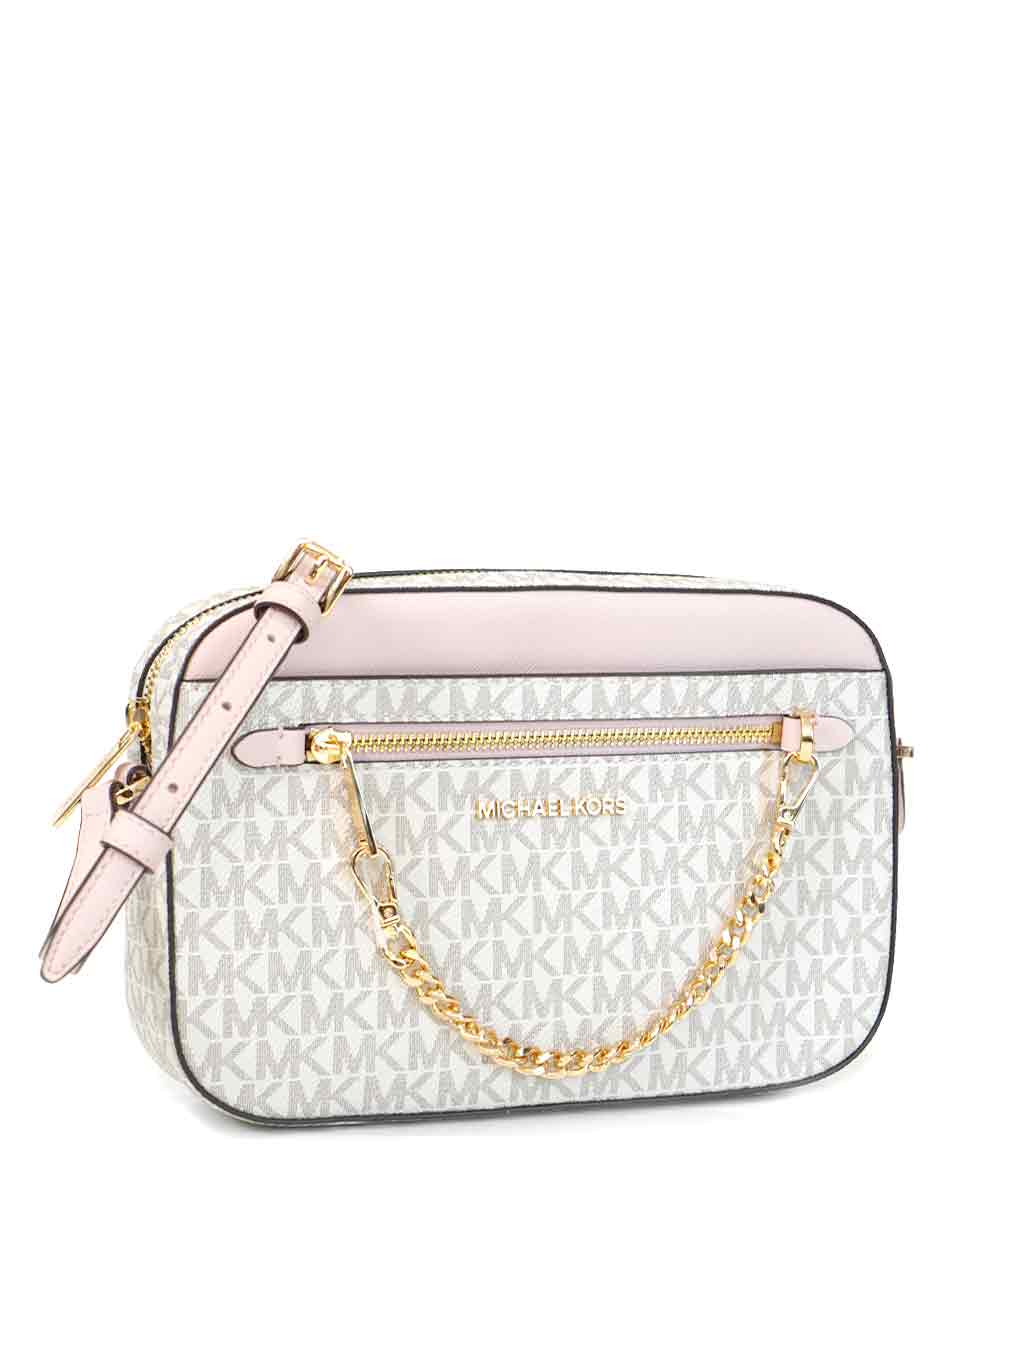 Michael Kors MK Jet set Item Large EW Zip Chain Crossbody - Bright White -  $139 (60% Off Retail) New With Tags - From Kash